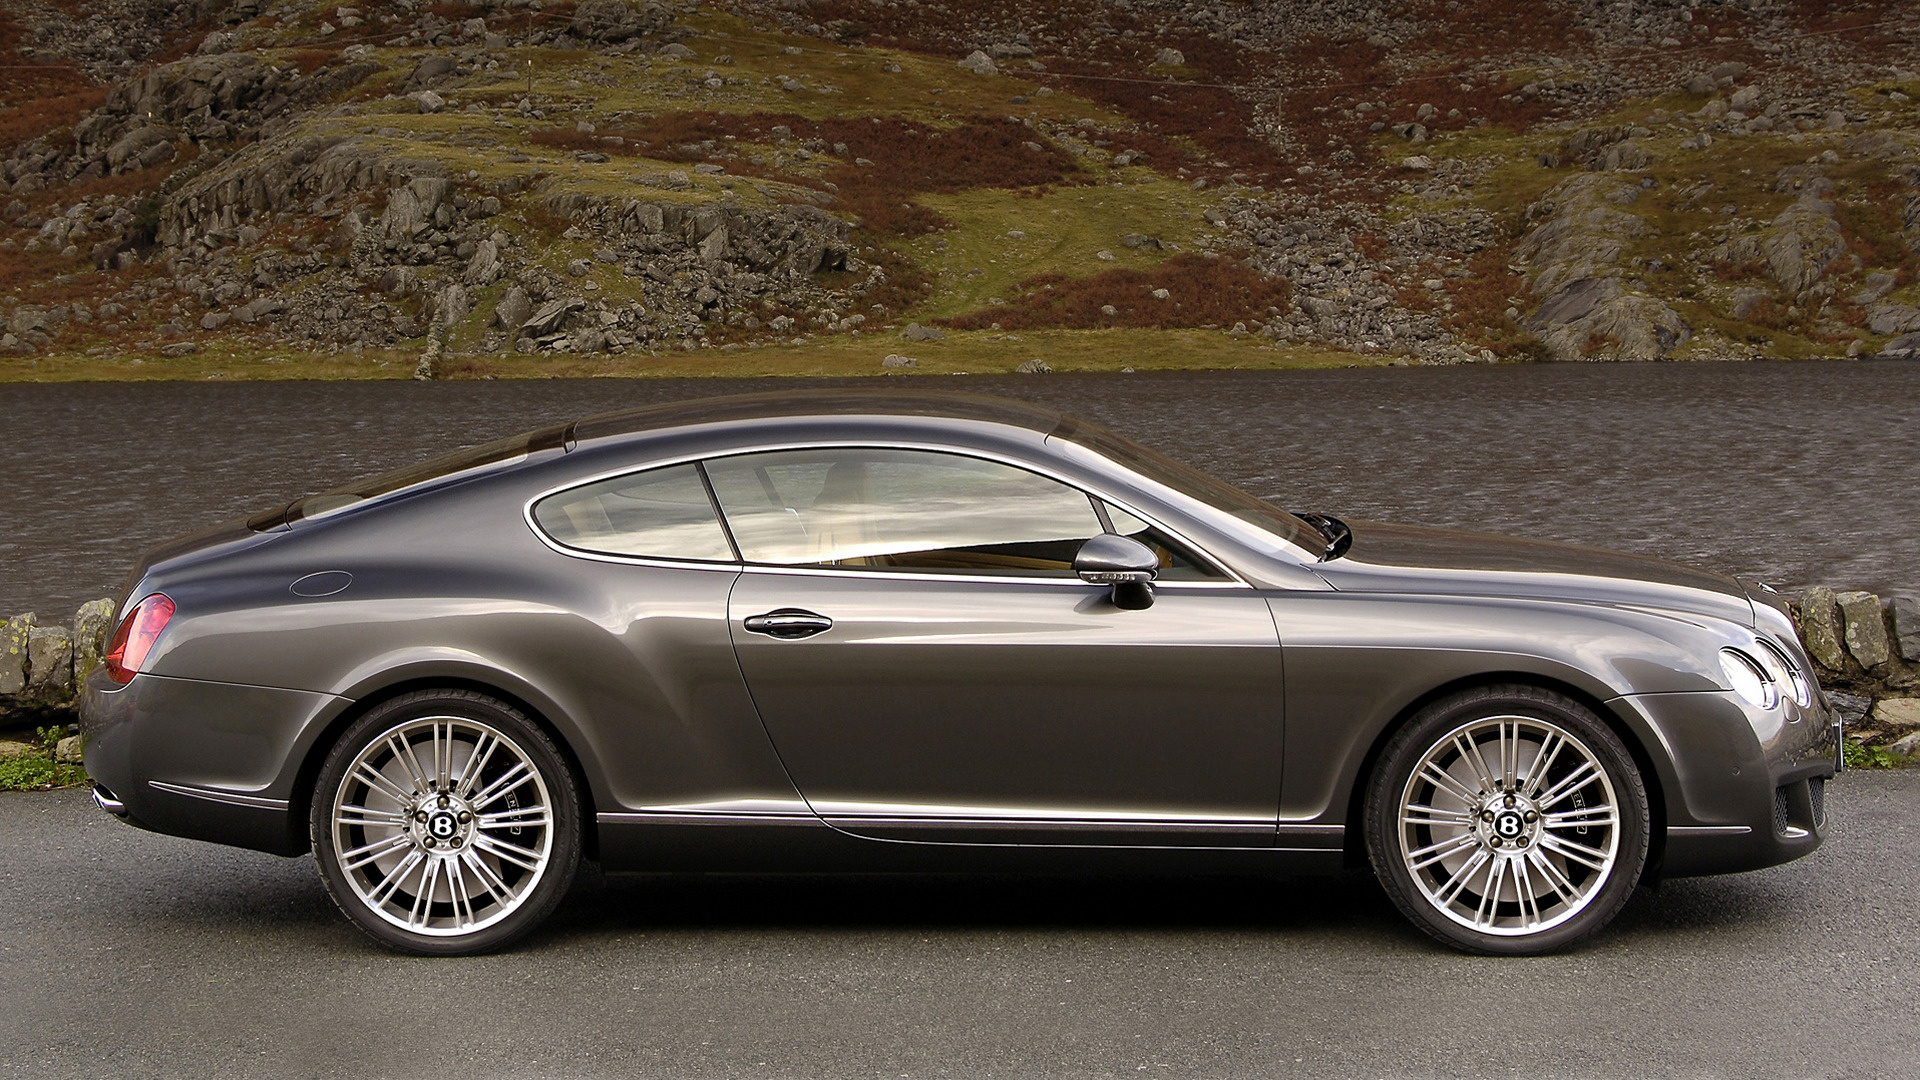 Bentley Continental Gt Speed Car Coupe Fastback Grand Tourer Gray Car Luxury Car 1920x1080